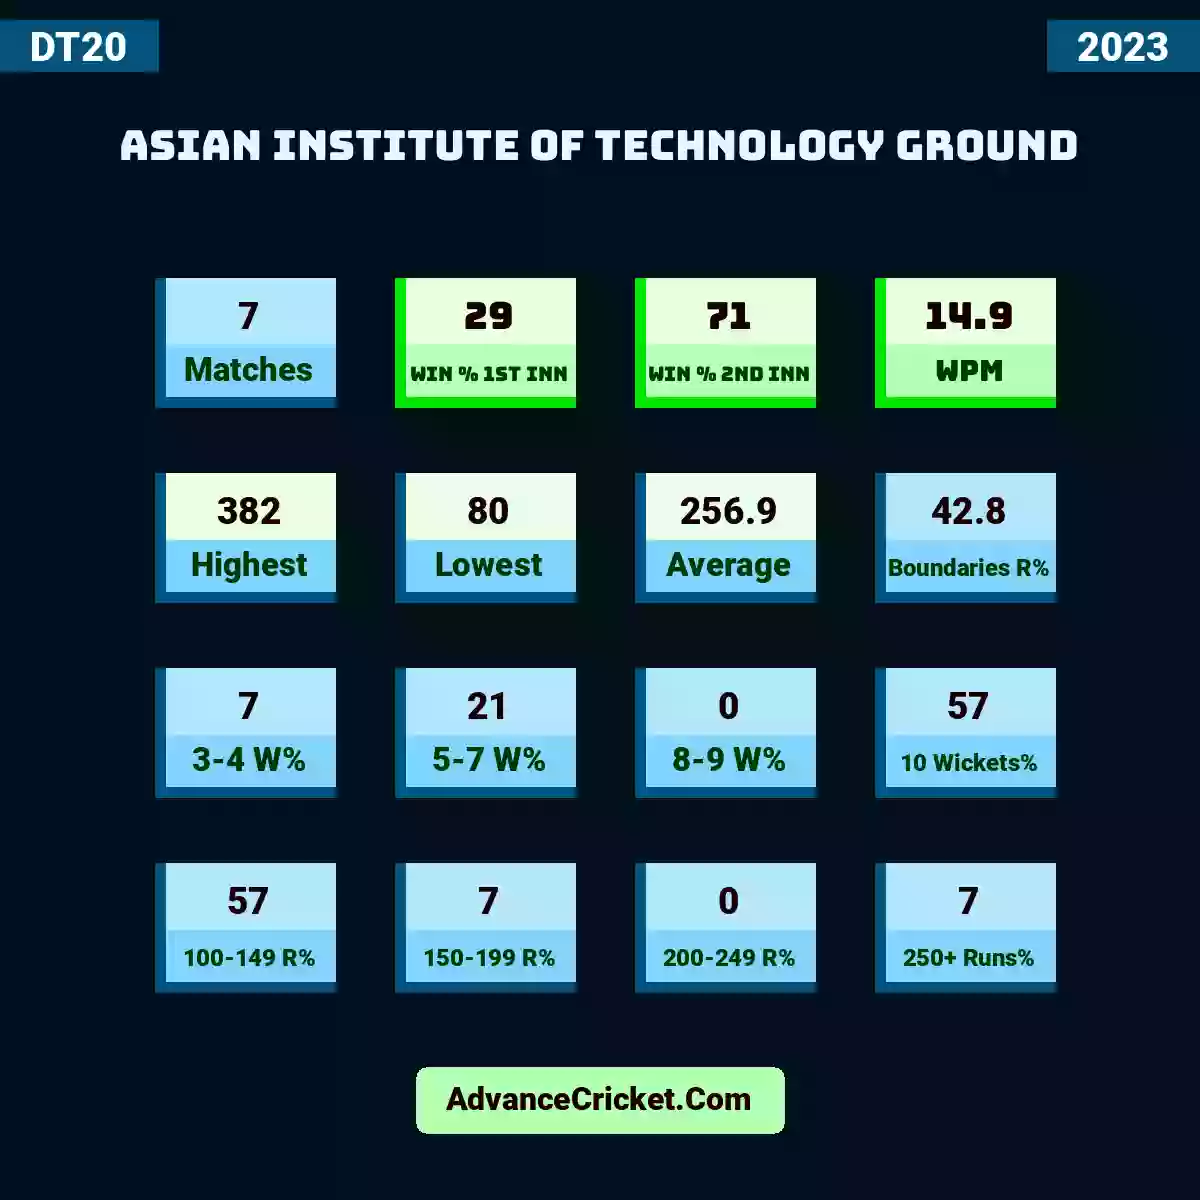 Image showing Asian Institute of Technology Ground with Matches: 7, Win % 1st Inn: 29, Win % 2nd Inn: 71, WPM: 14.9, Highest: 382, Lowest: 80, Average: 256.9, Boundaries R%: 42.8, 3-4 W%: 7, 5-7 W%: 21, 8-9 W%: 0, 10 Wickets%: 57, 100-149 R%: 57, 150-199 R%: 7, 200-249 R%: 0, 250+ Runs%: 7.